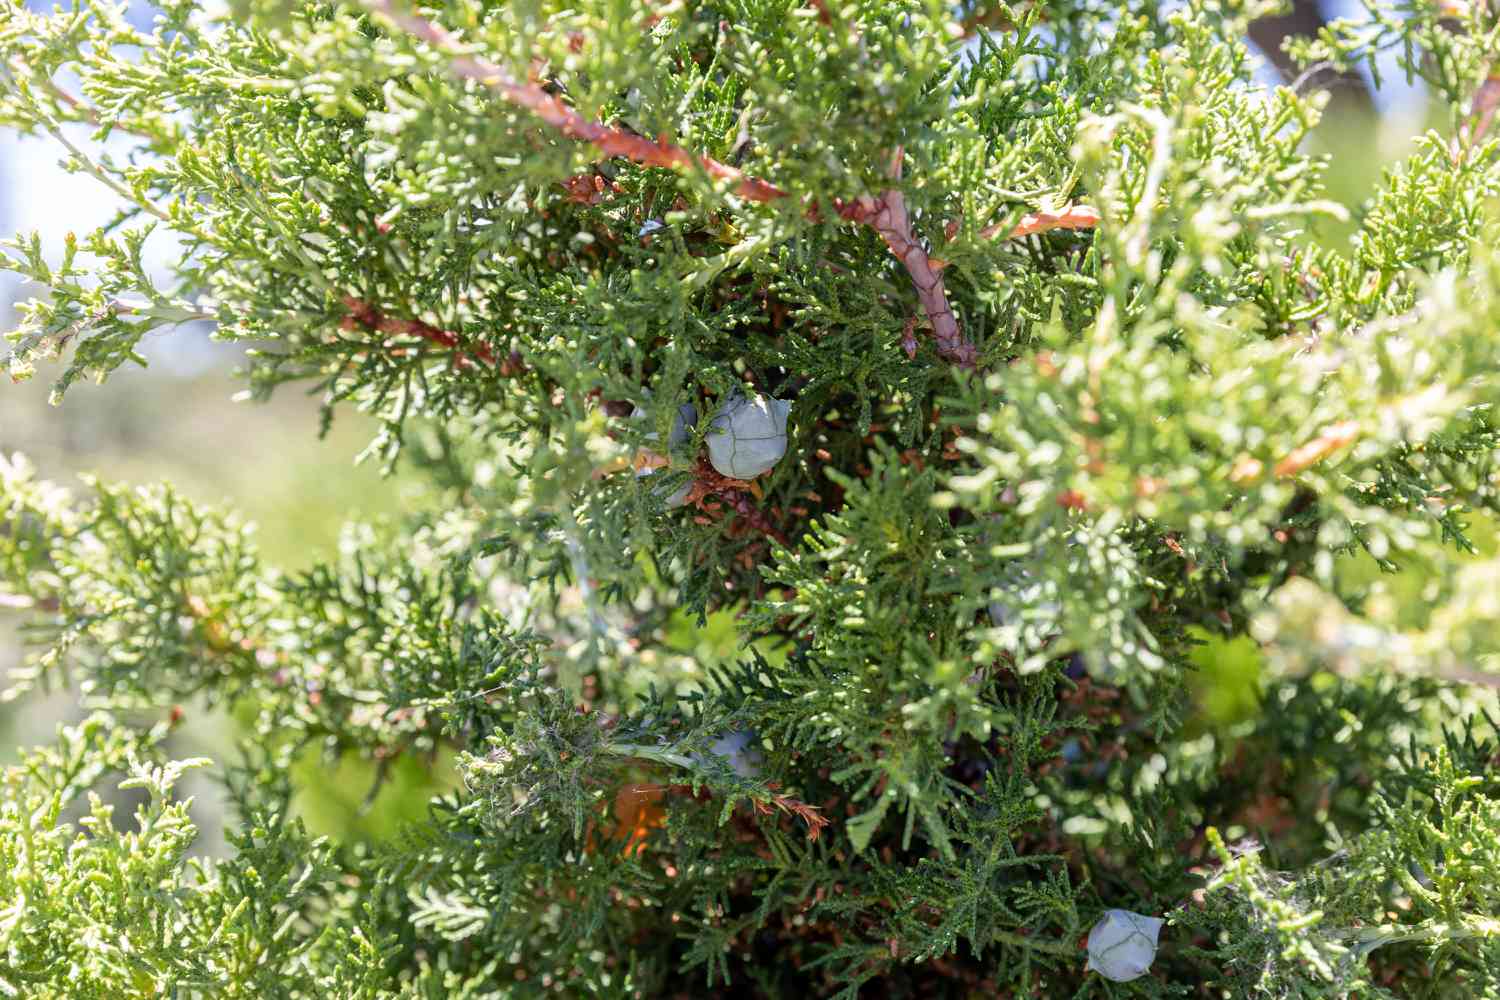 Western juniper tree branches with scaly evergreen leaves and small fleshy cones closeup